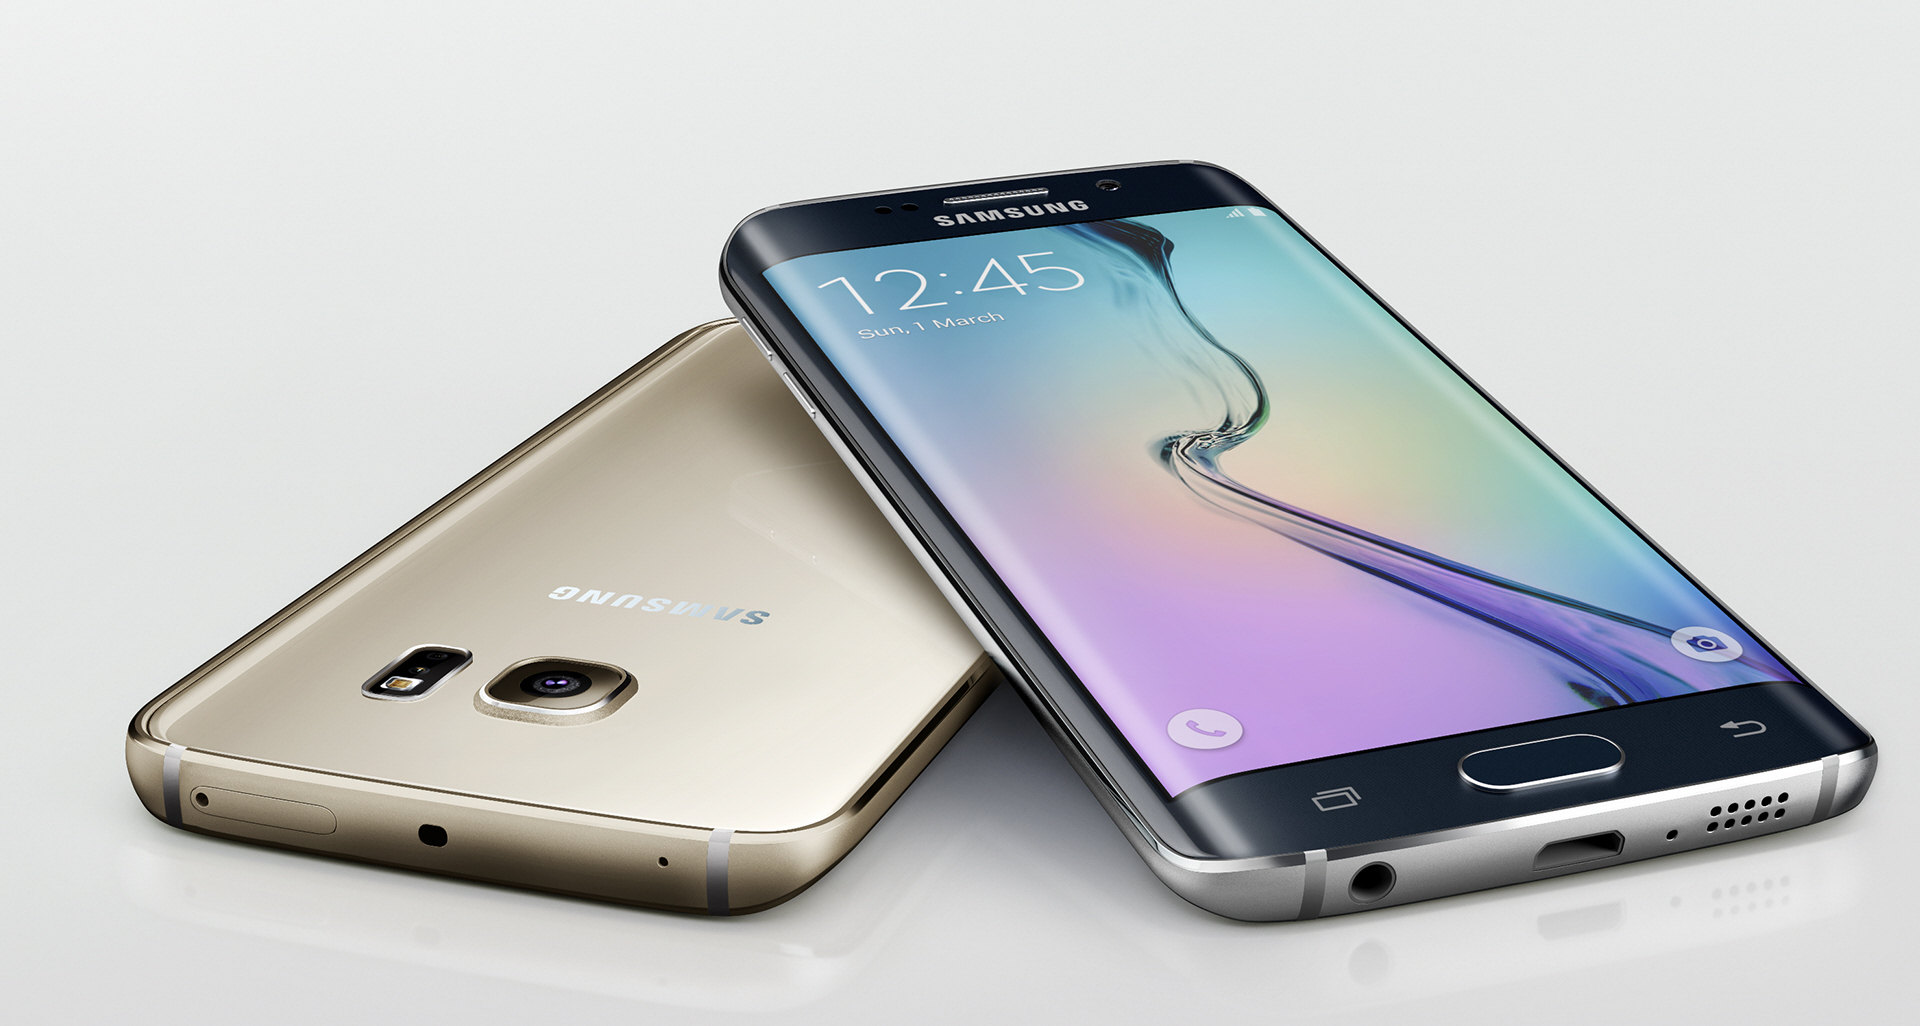 Samsung Galaxy S6 Edge: What's so special about the smartphone?